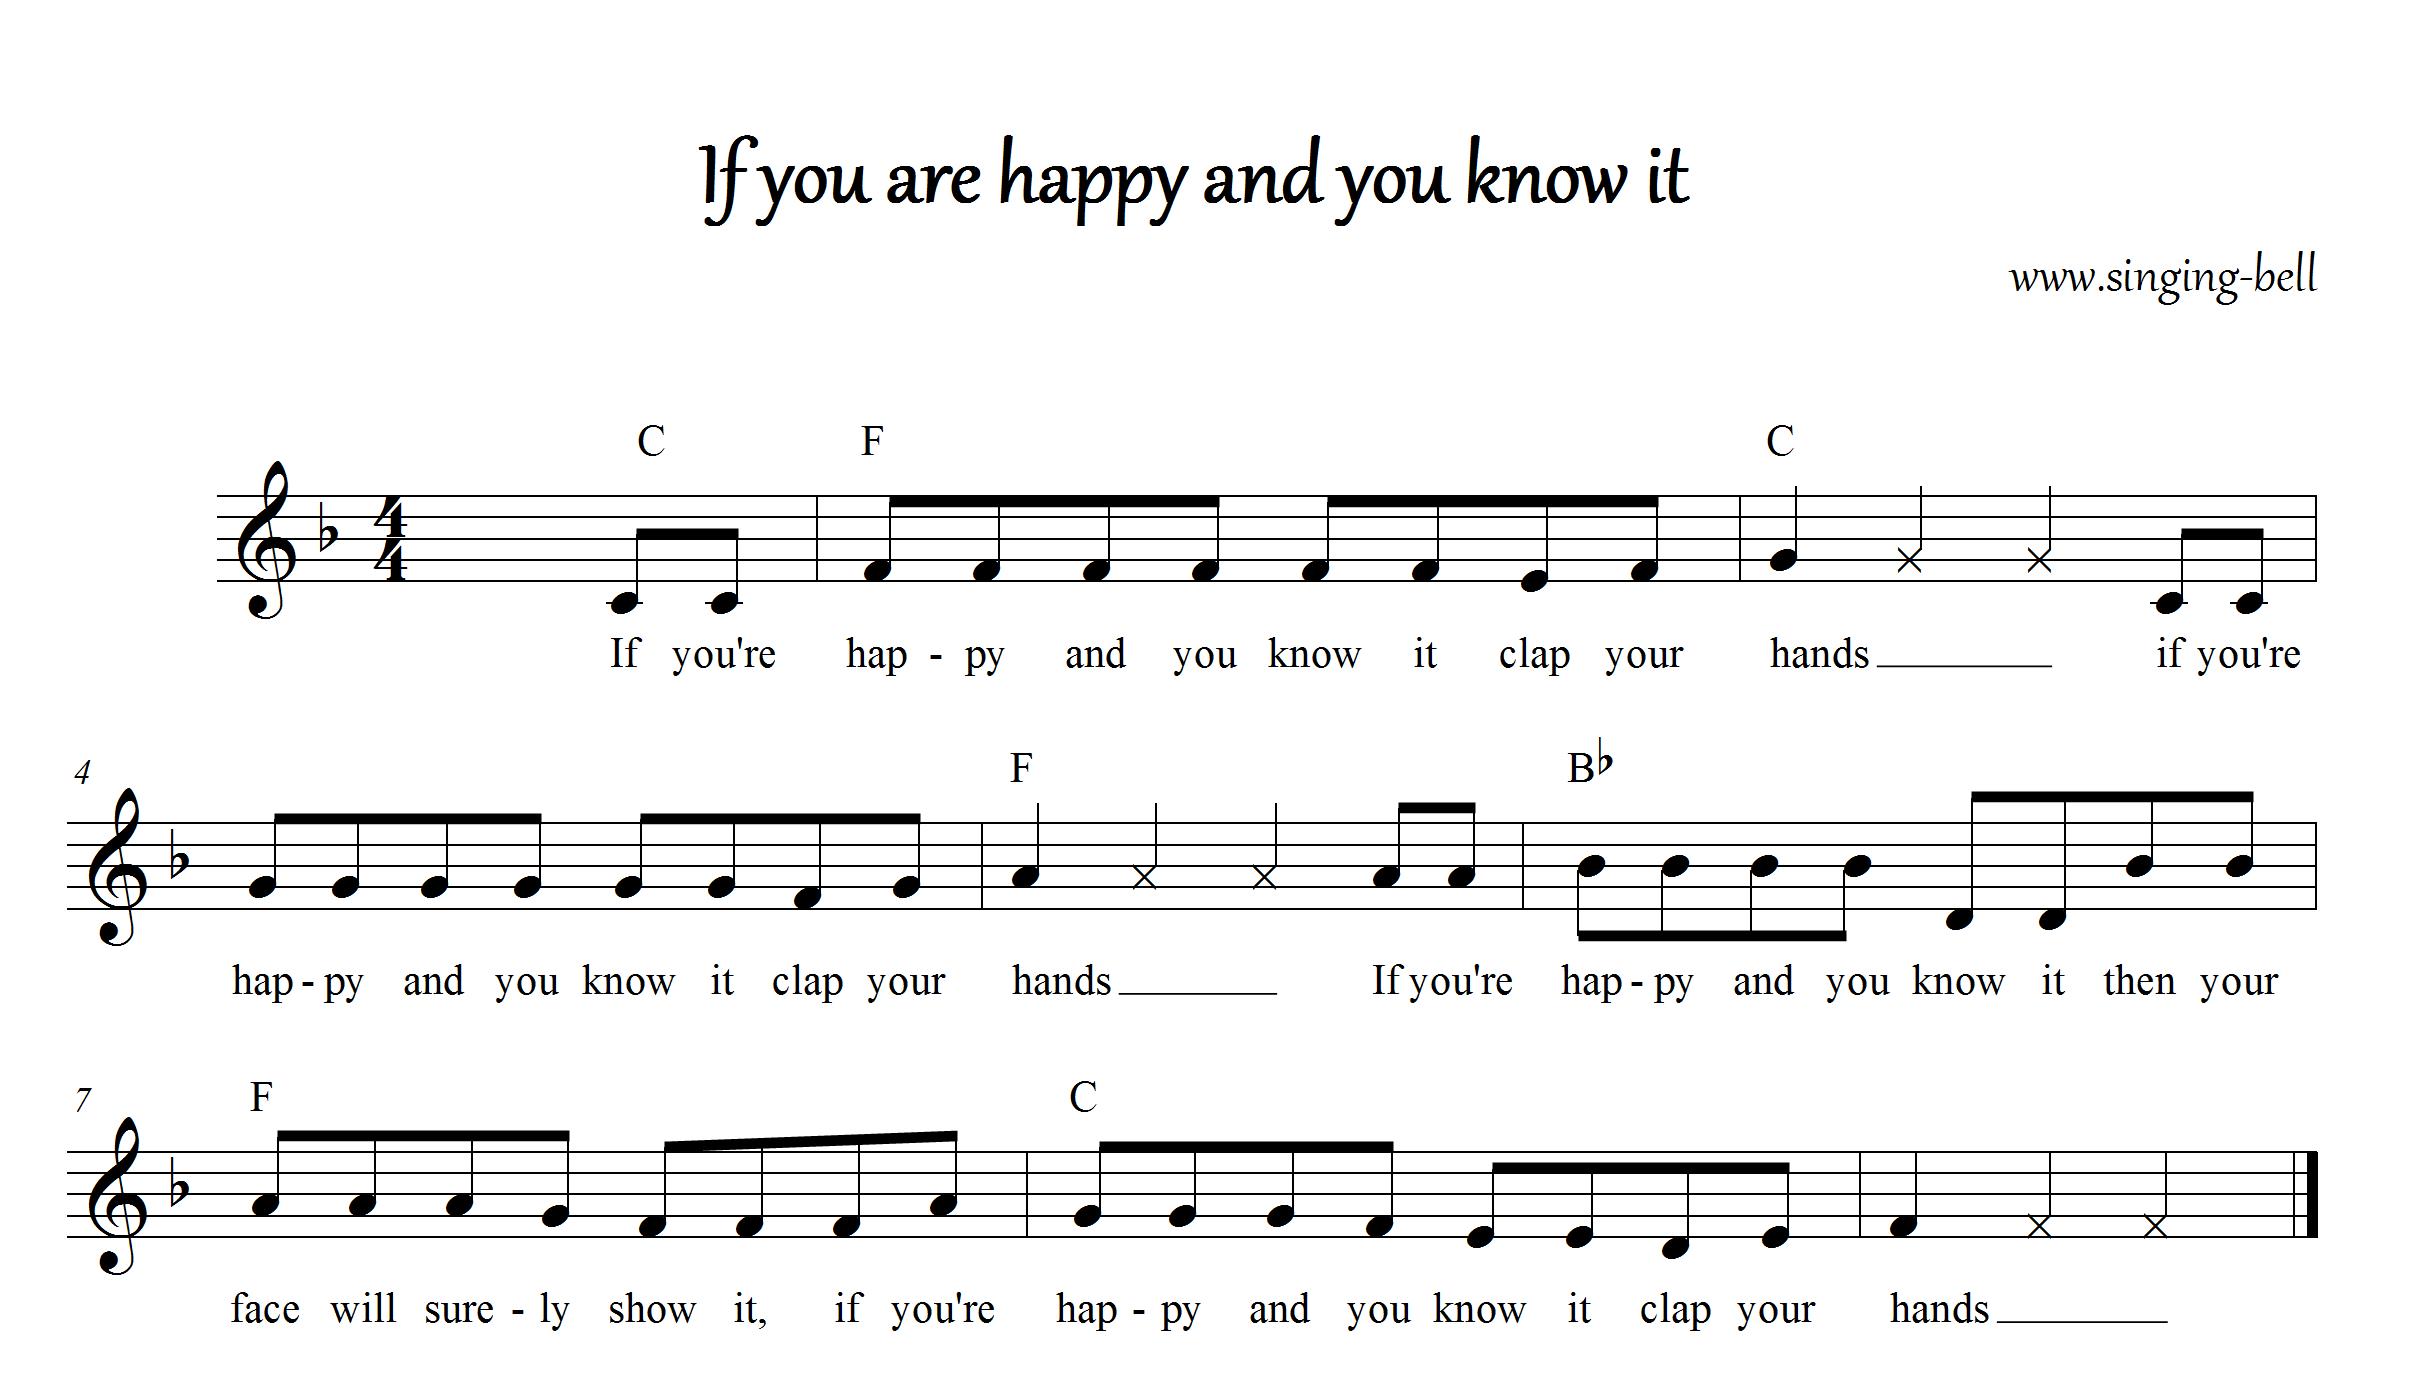 If-you-are-happy-and-you-know-it_F_singing-bell (1)